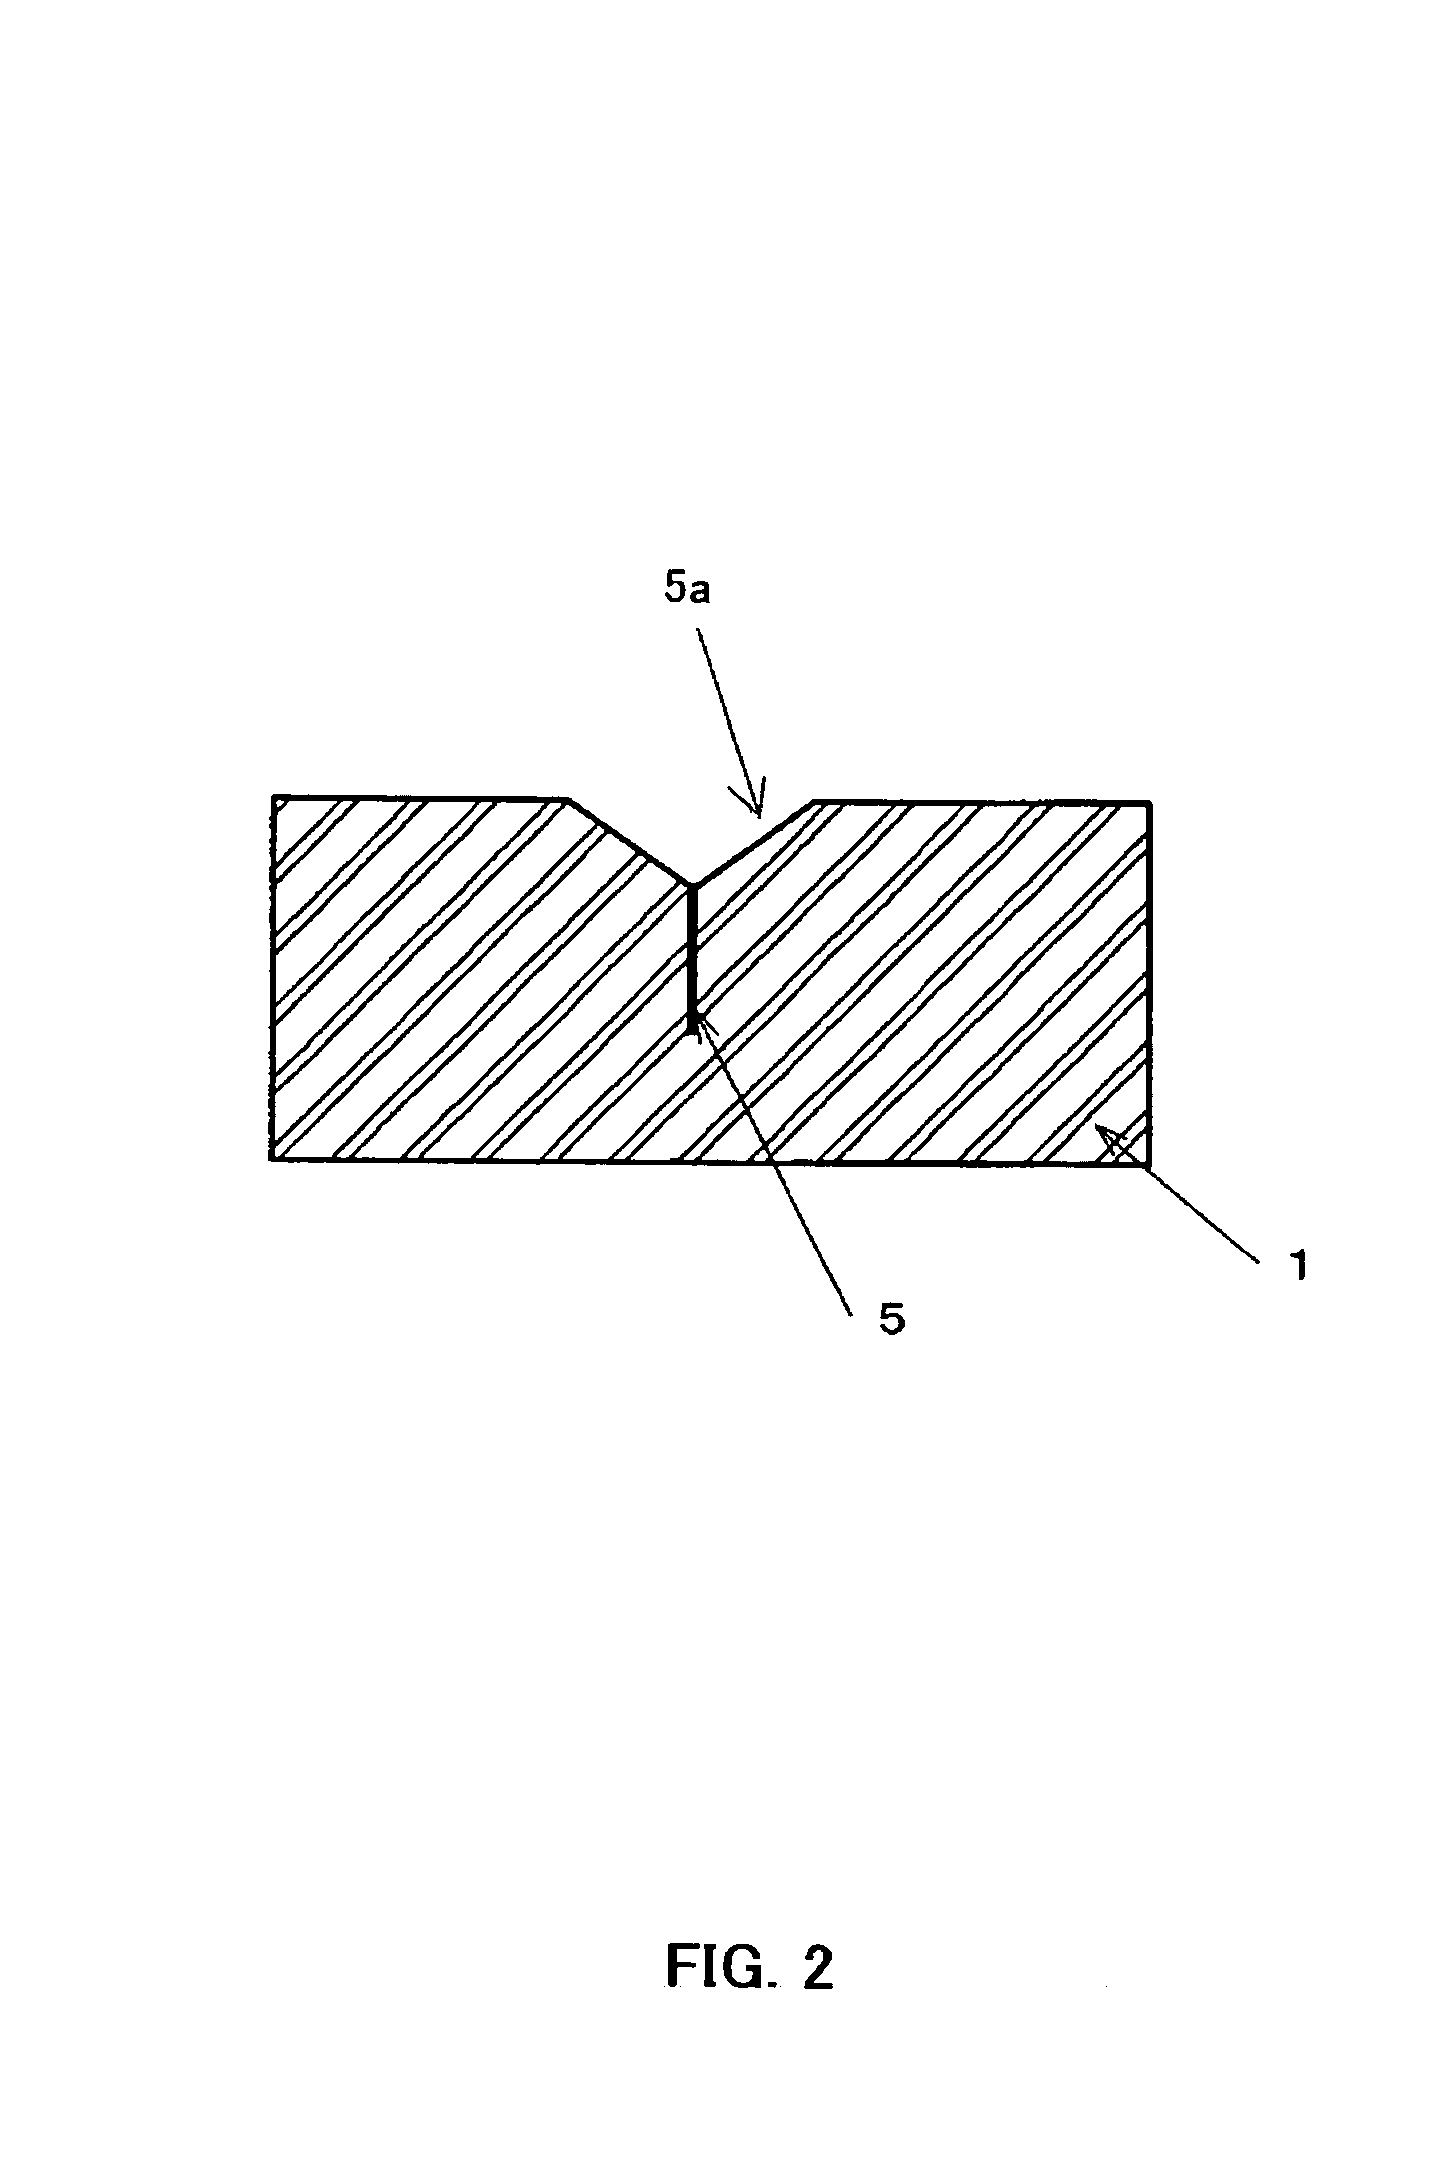 Manufacturing method of optical devices